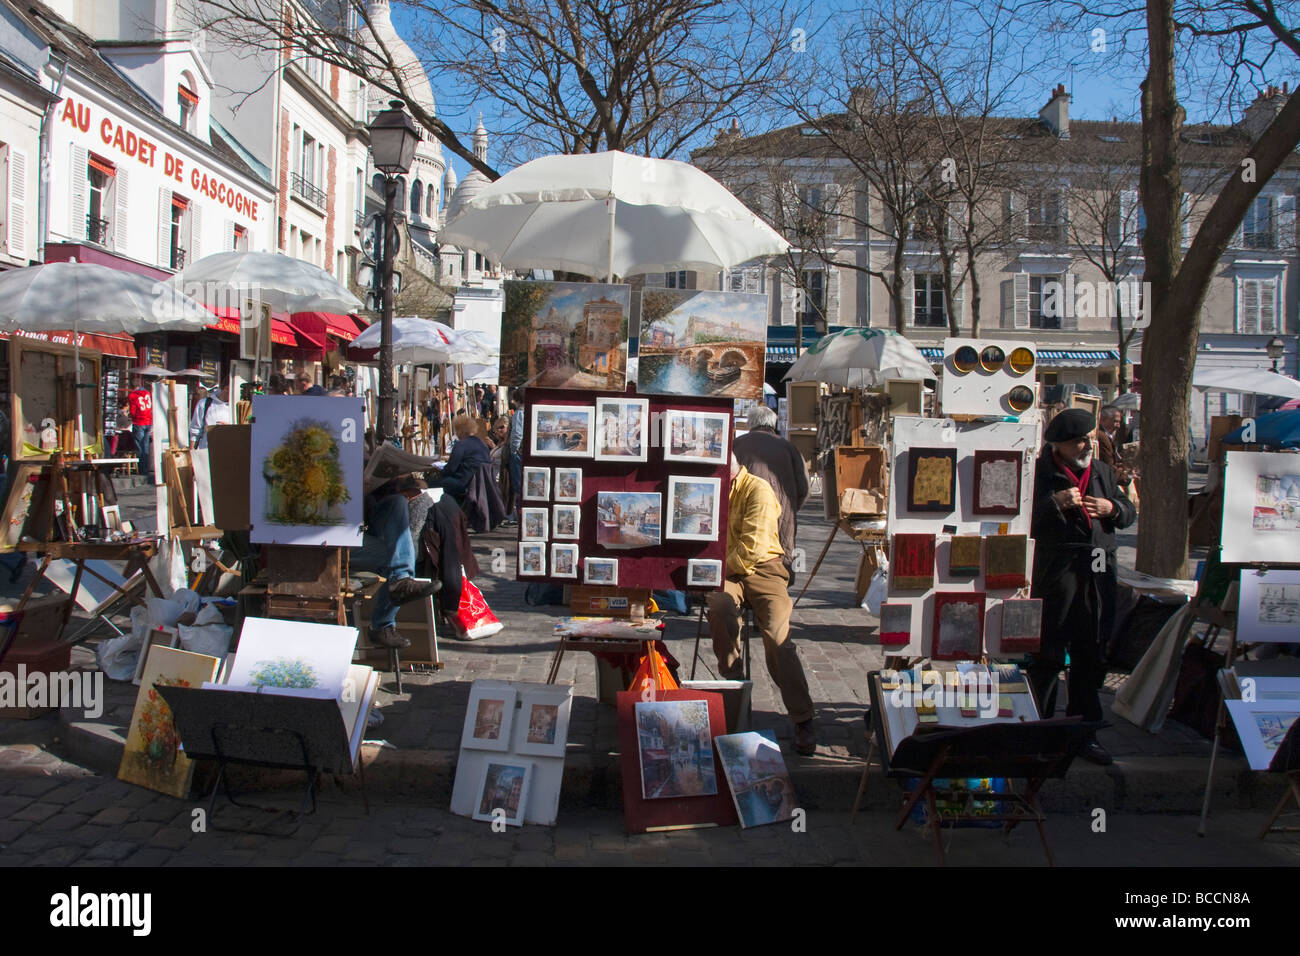 A Street Art Market Montmartre Sacre Coeur in the background painting of the same view in the foreground Paris France Europe Stock Photo